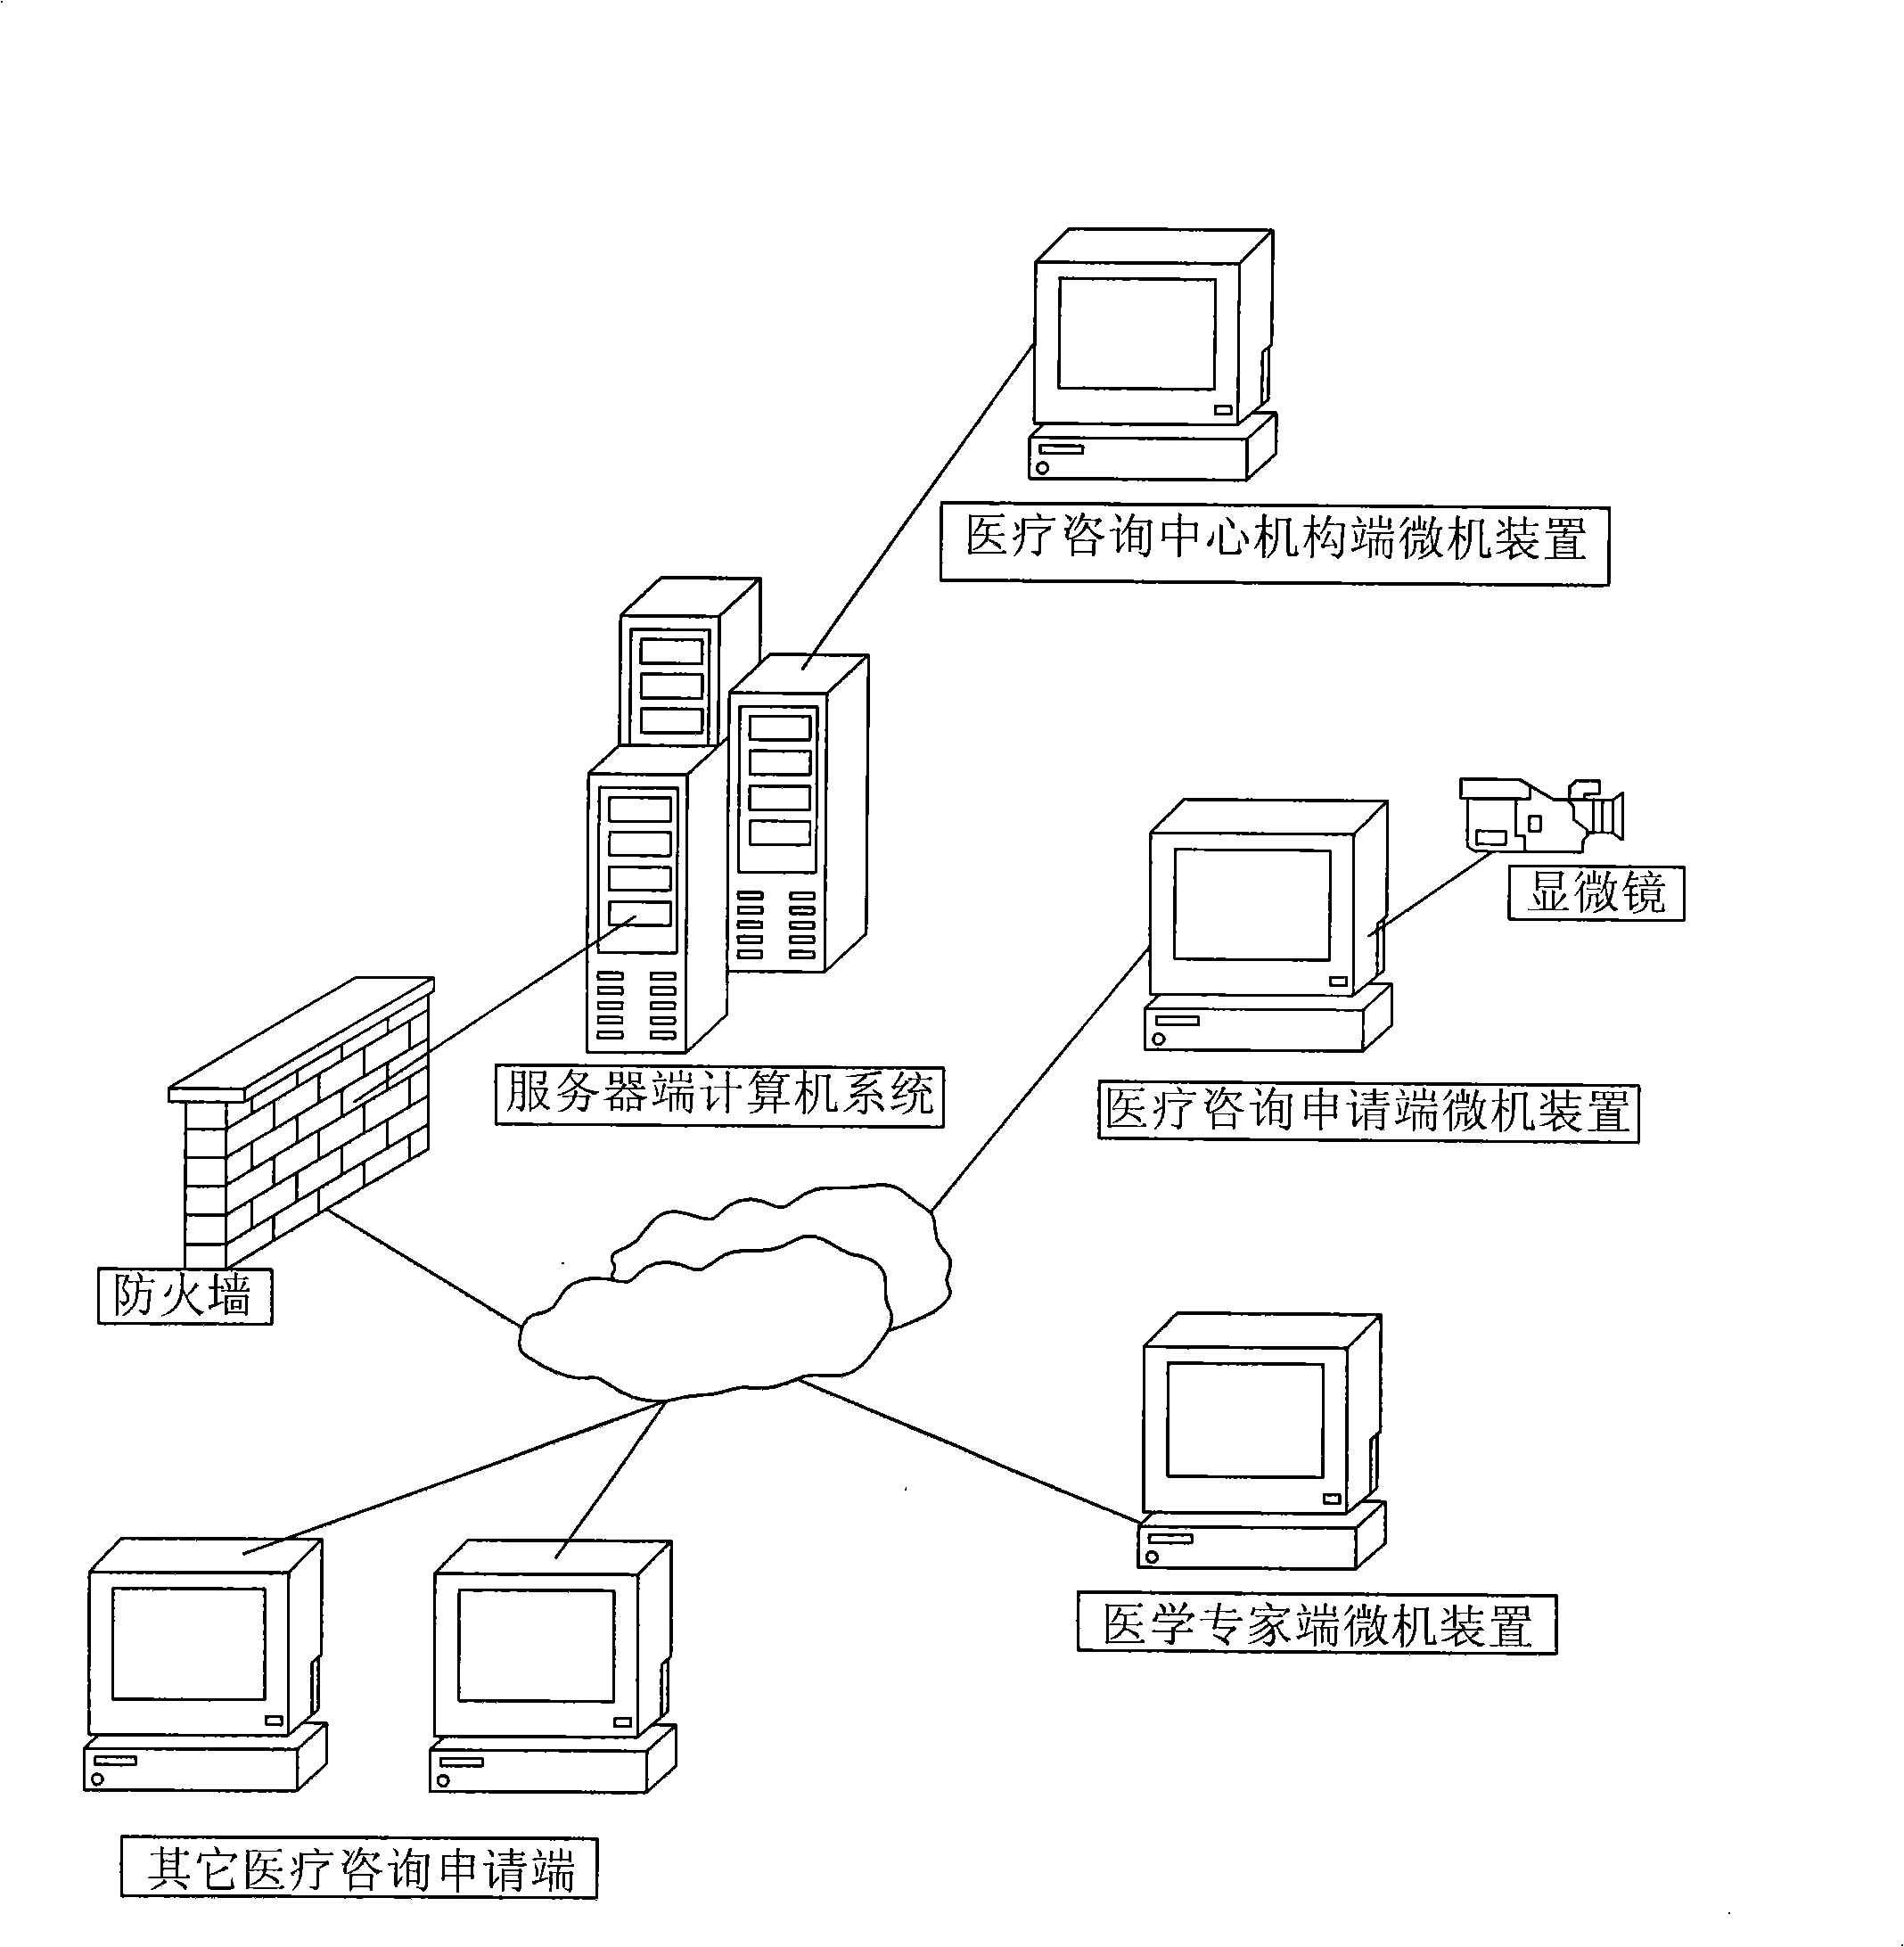 Doctor-patient remote interaction platform and method